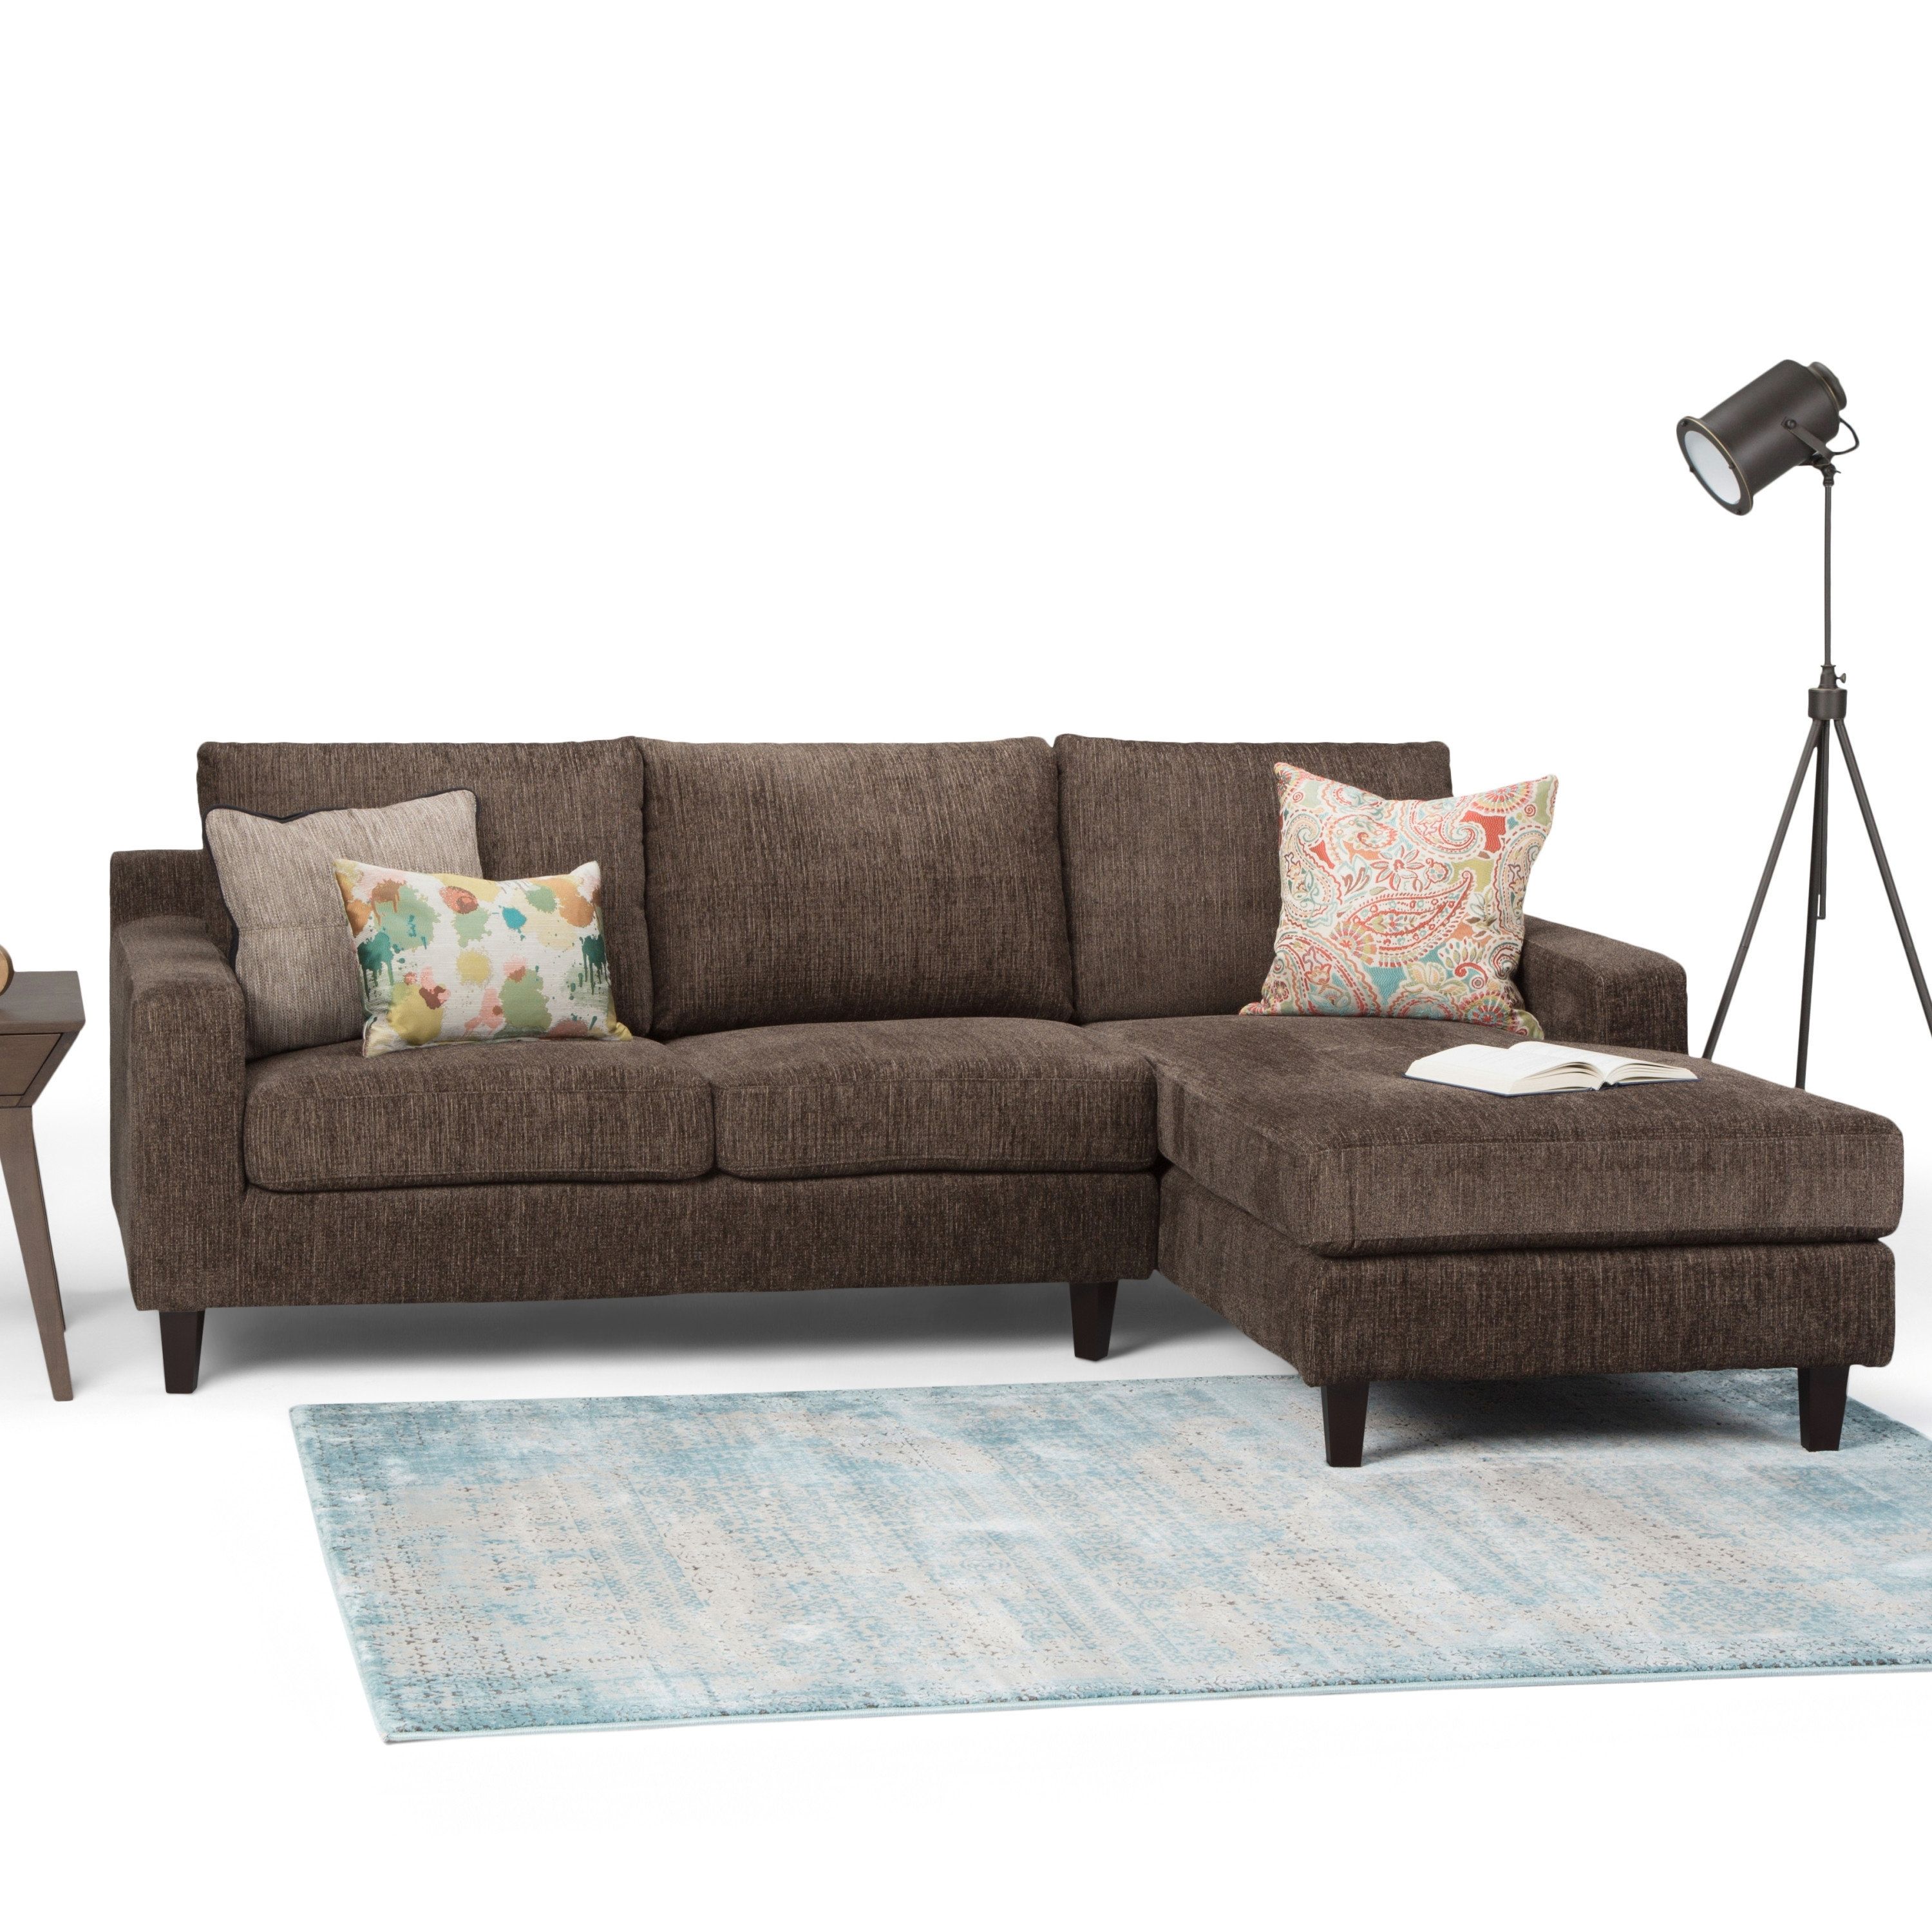 Simpli Home Marisa Sectional With Ottoman | Wayfair Throughout Marissa Ii 3 Piece Sectionals (View 12 of 30)